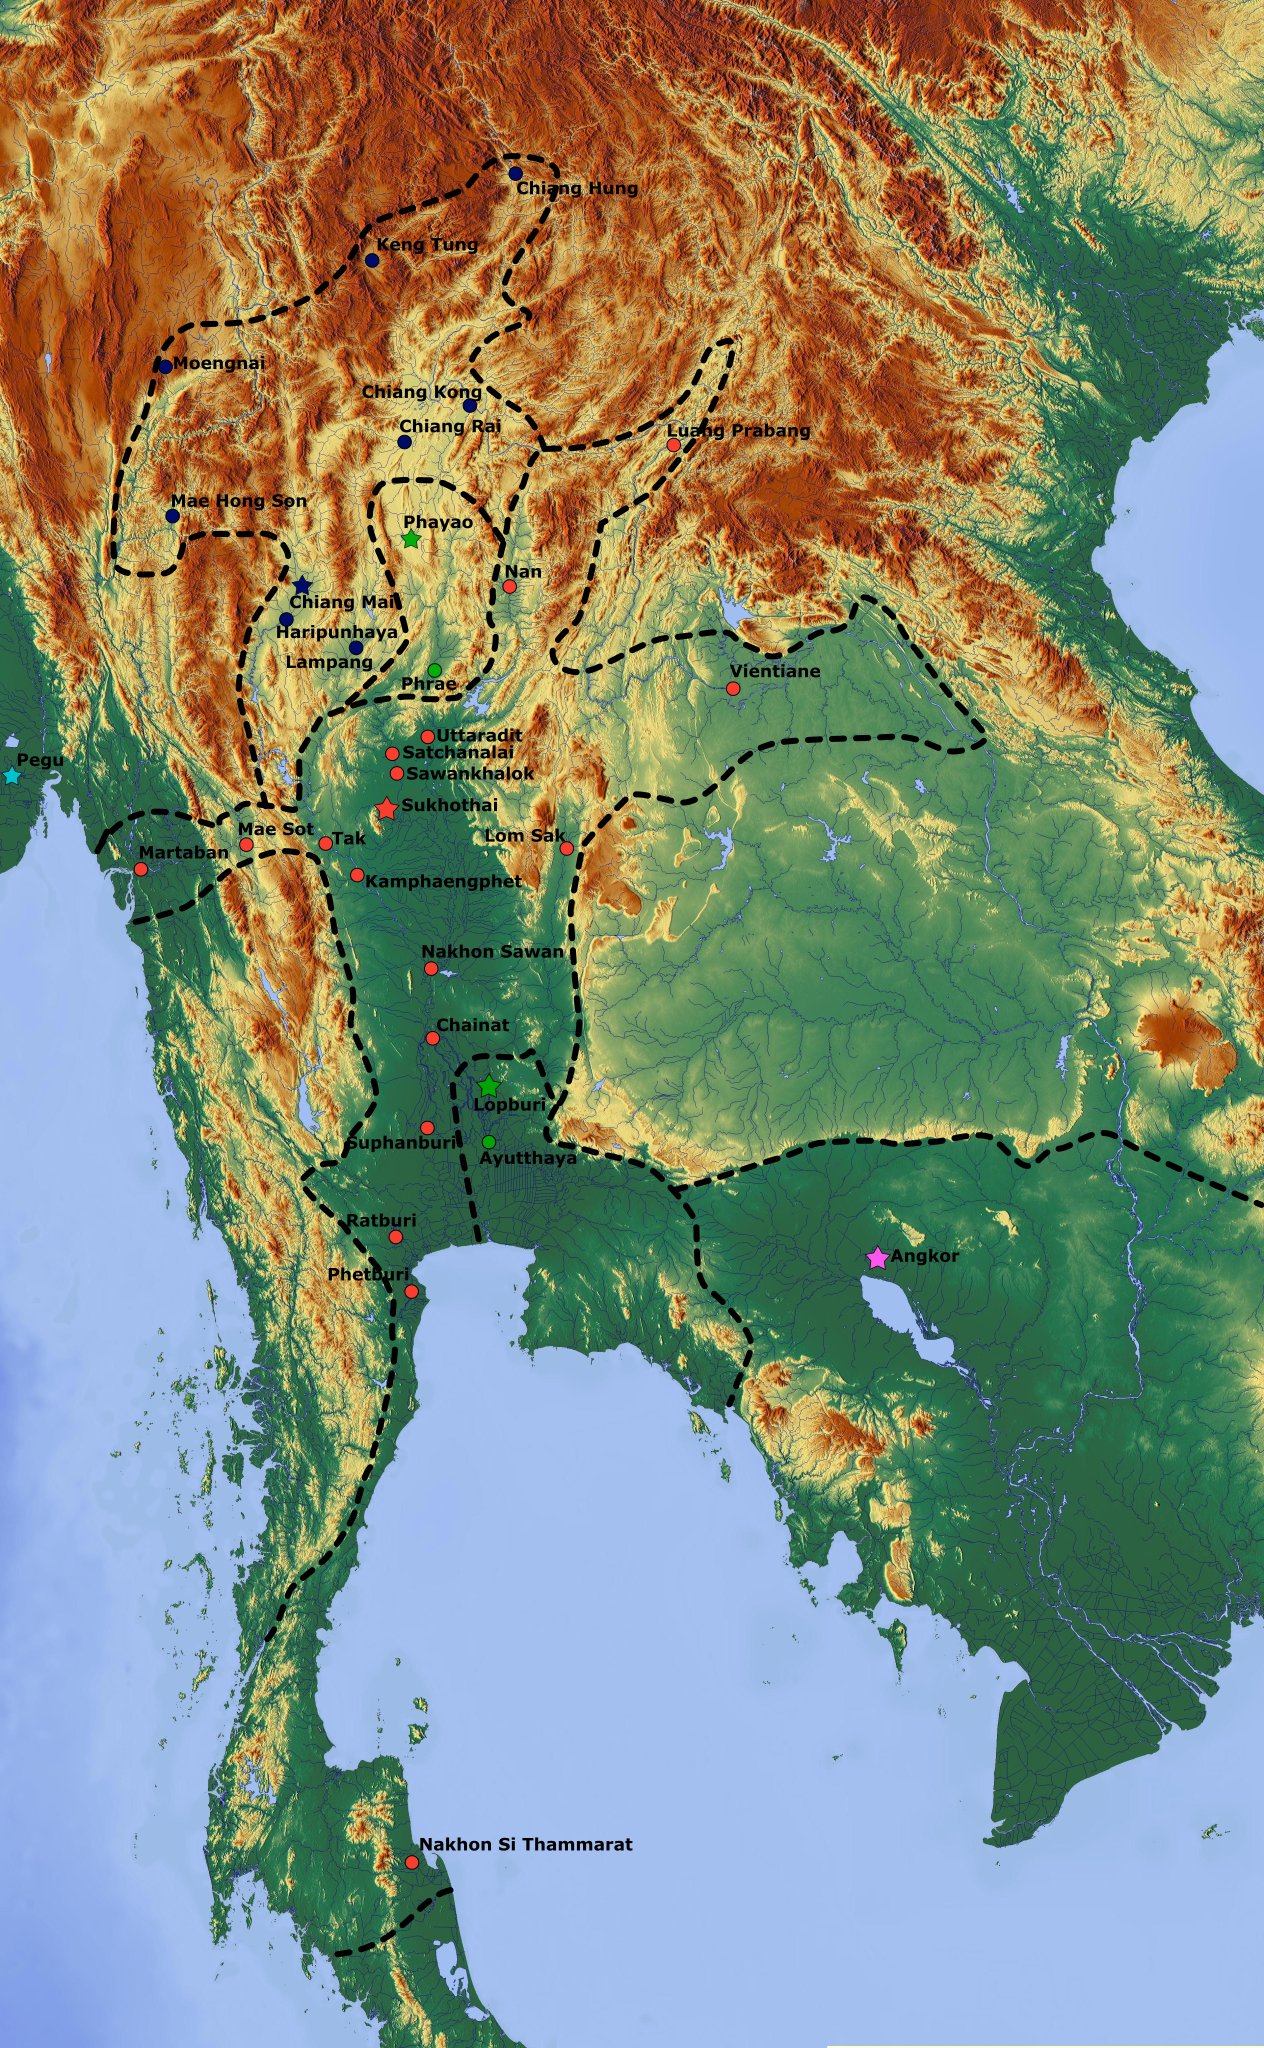 The Sukhothai Kingdom at its greatest extent during the late 13th